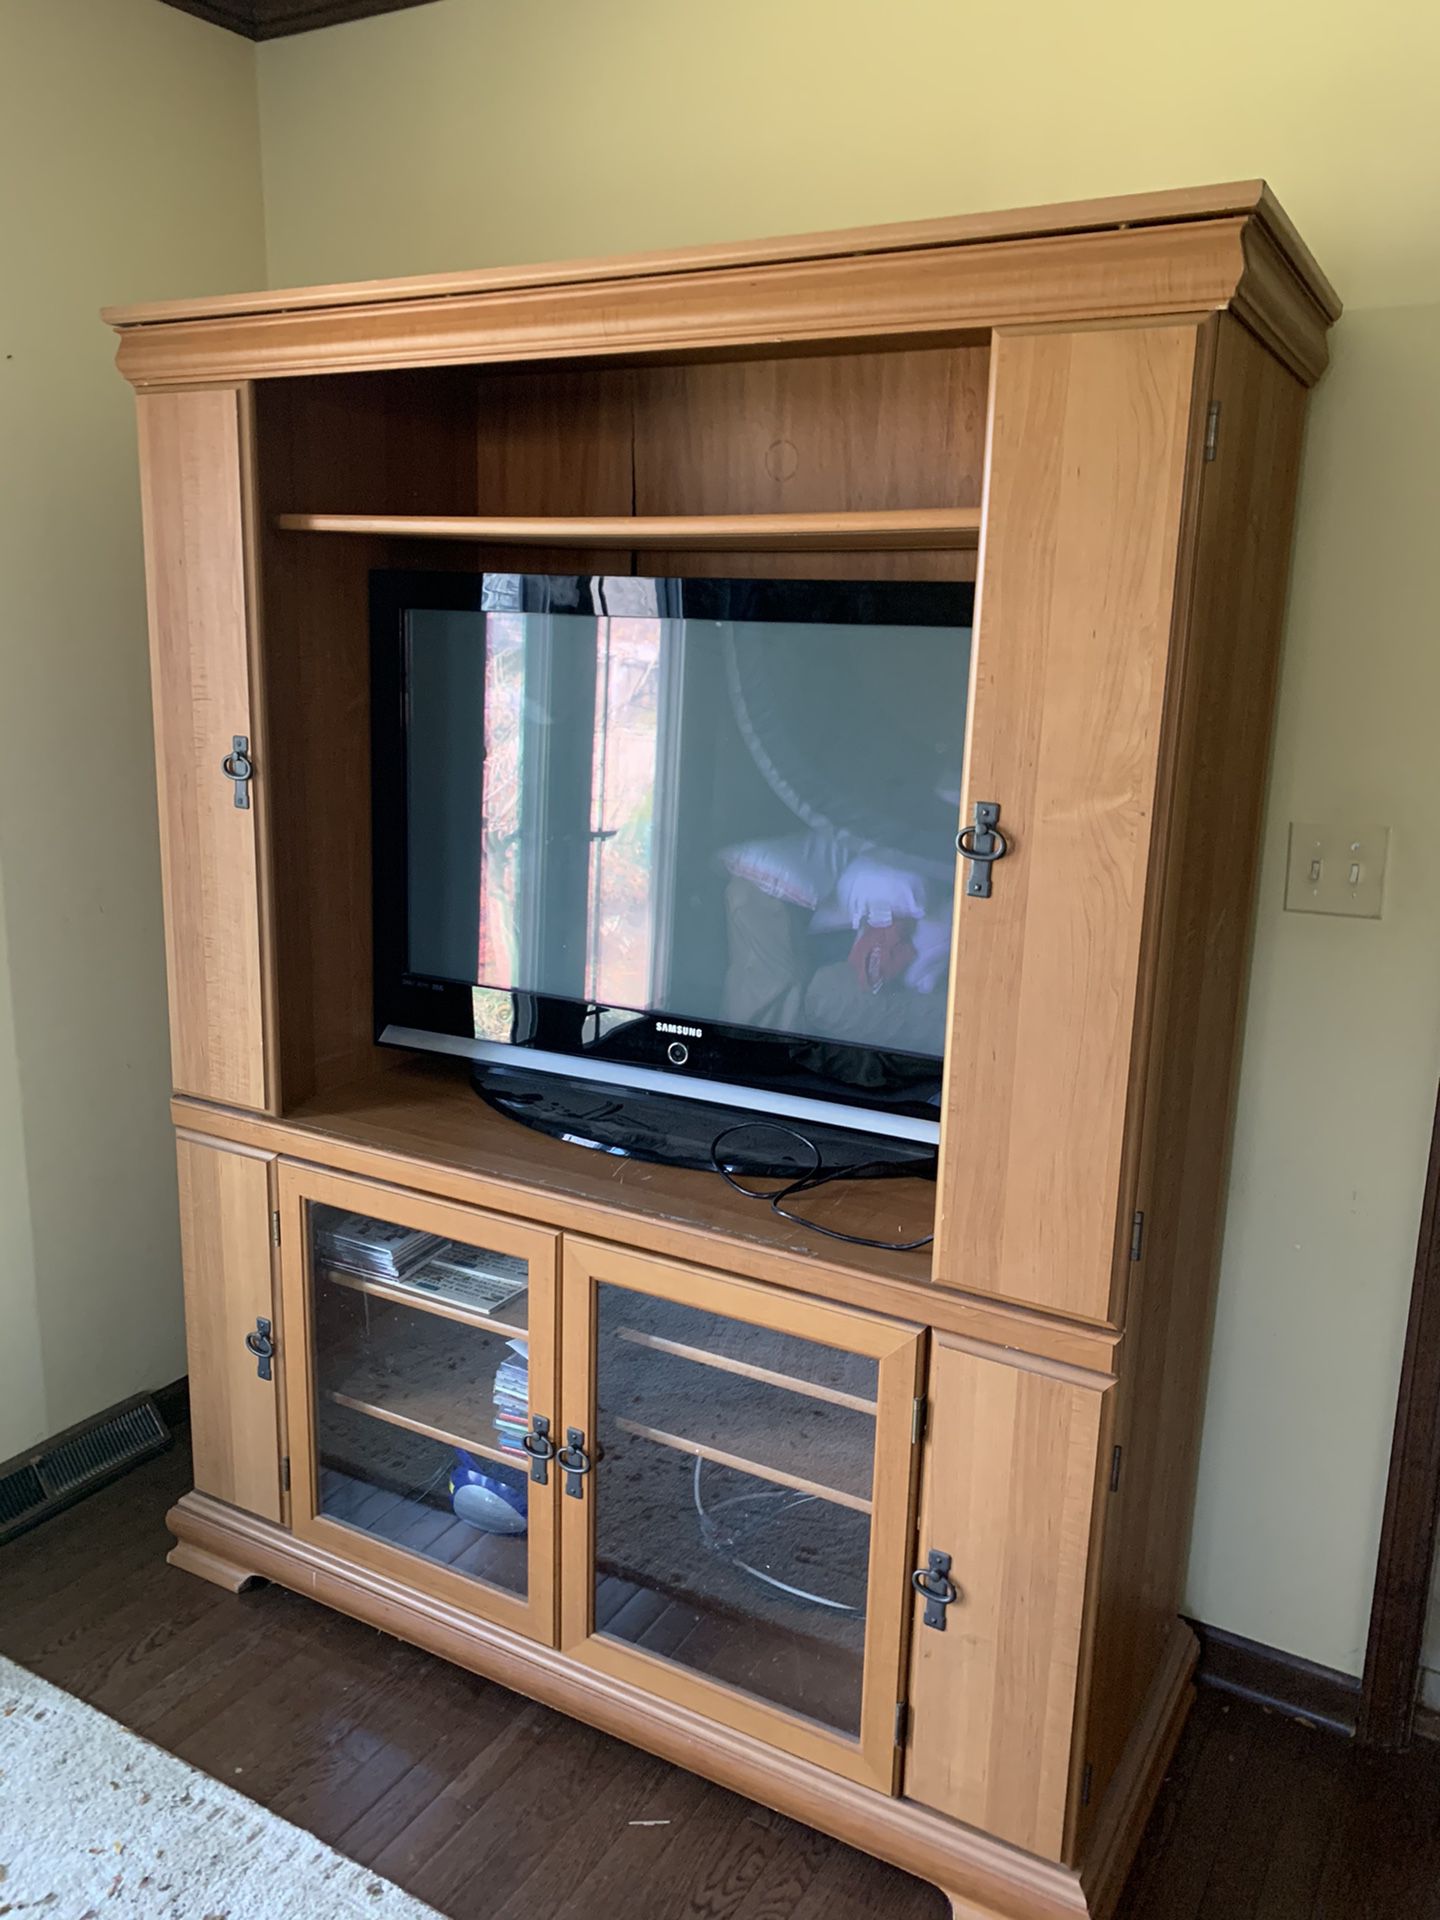 Free Samsung TV and entertainment center